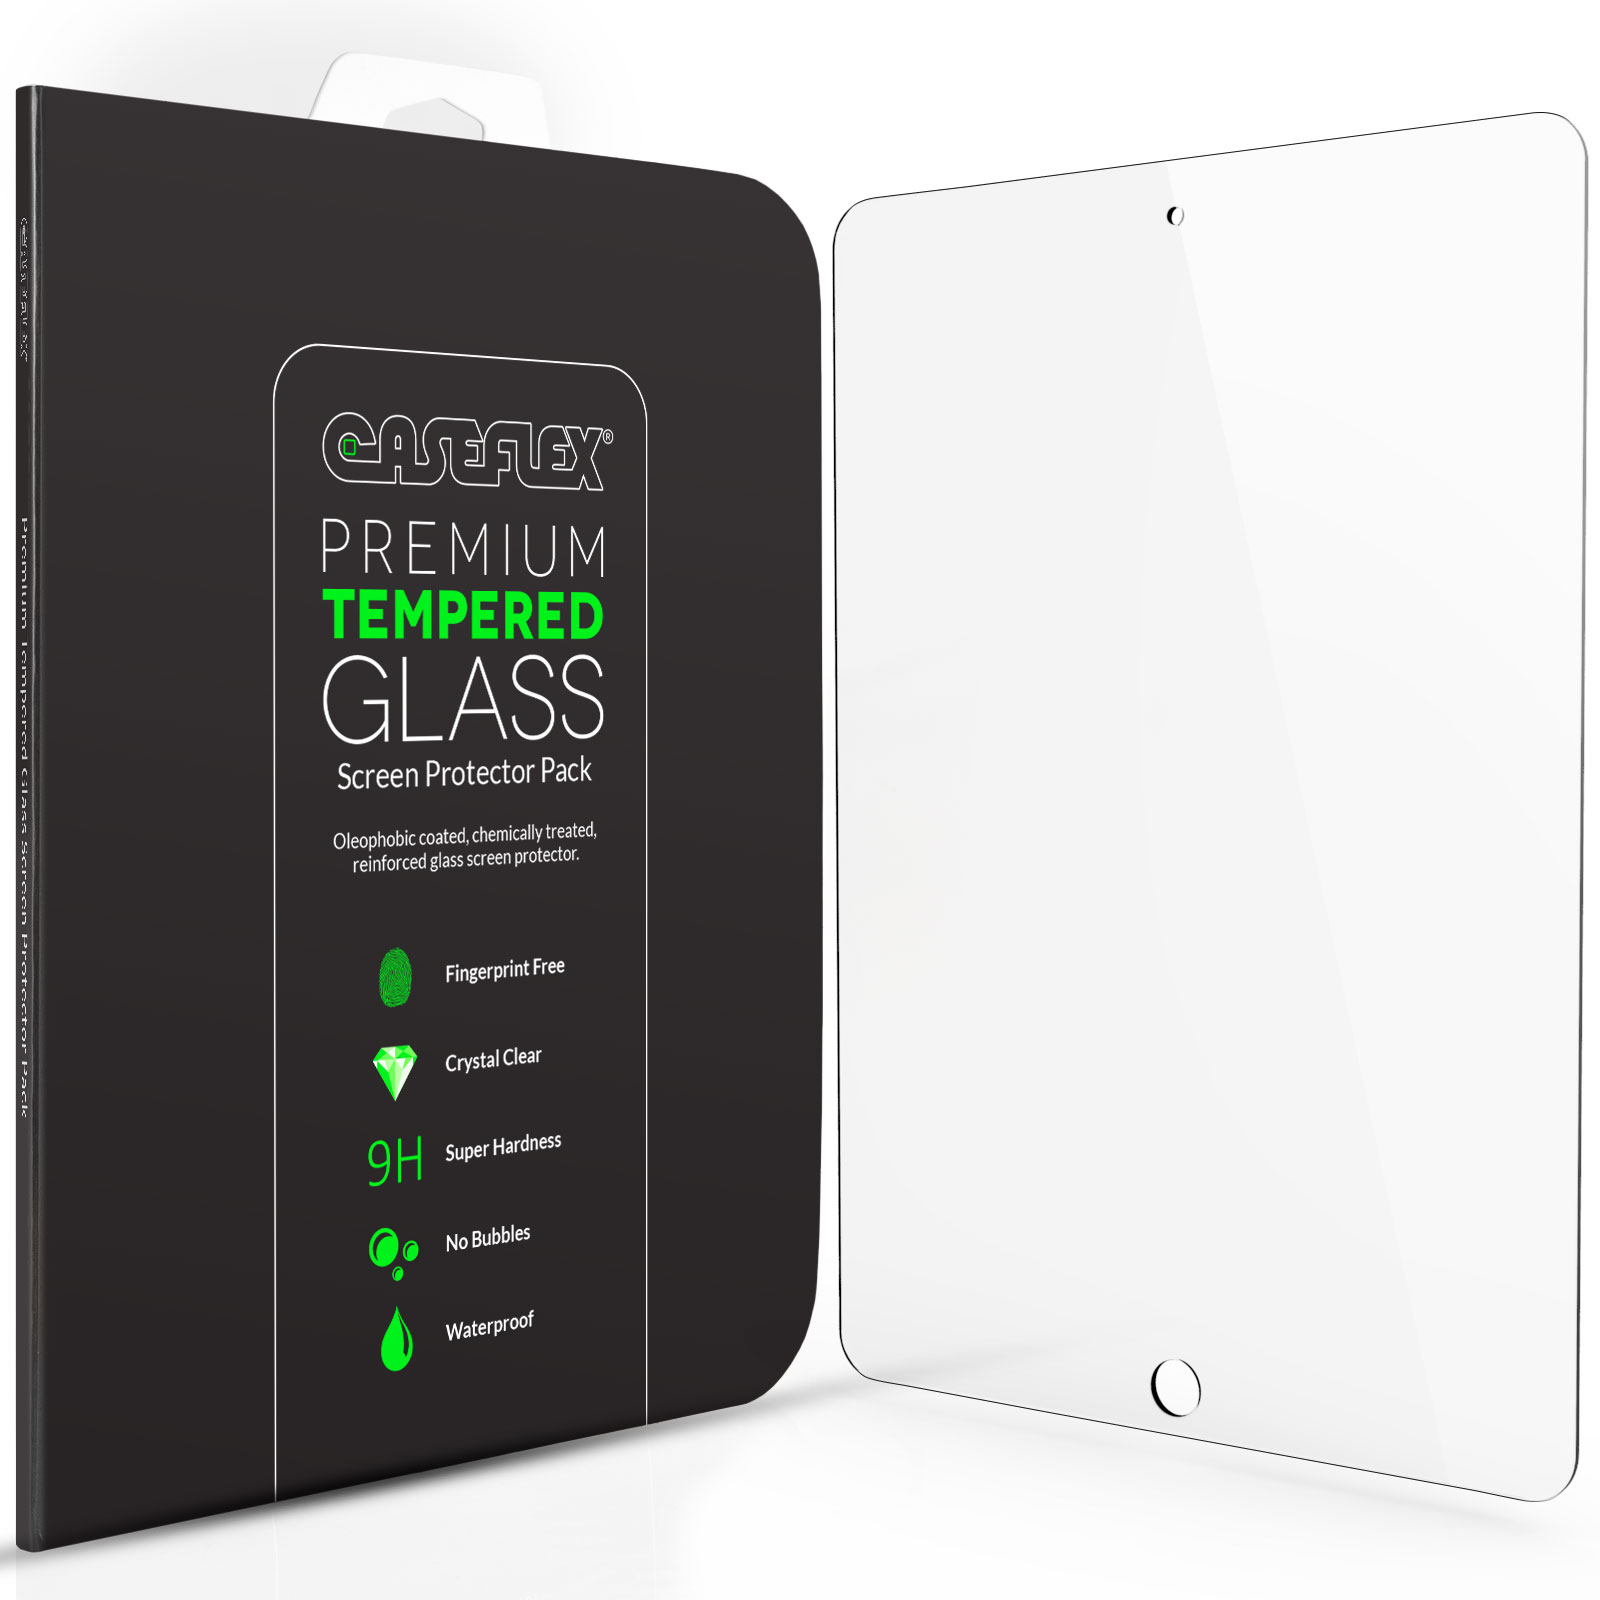 Caseflex iPad Air / Air 2 Tempered Glass Screen Protector [Retina Display Compatible 0.2mm Thickness / 9H Hardness Rating]